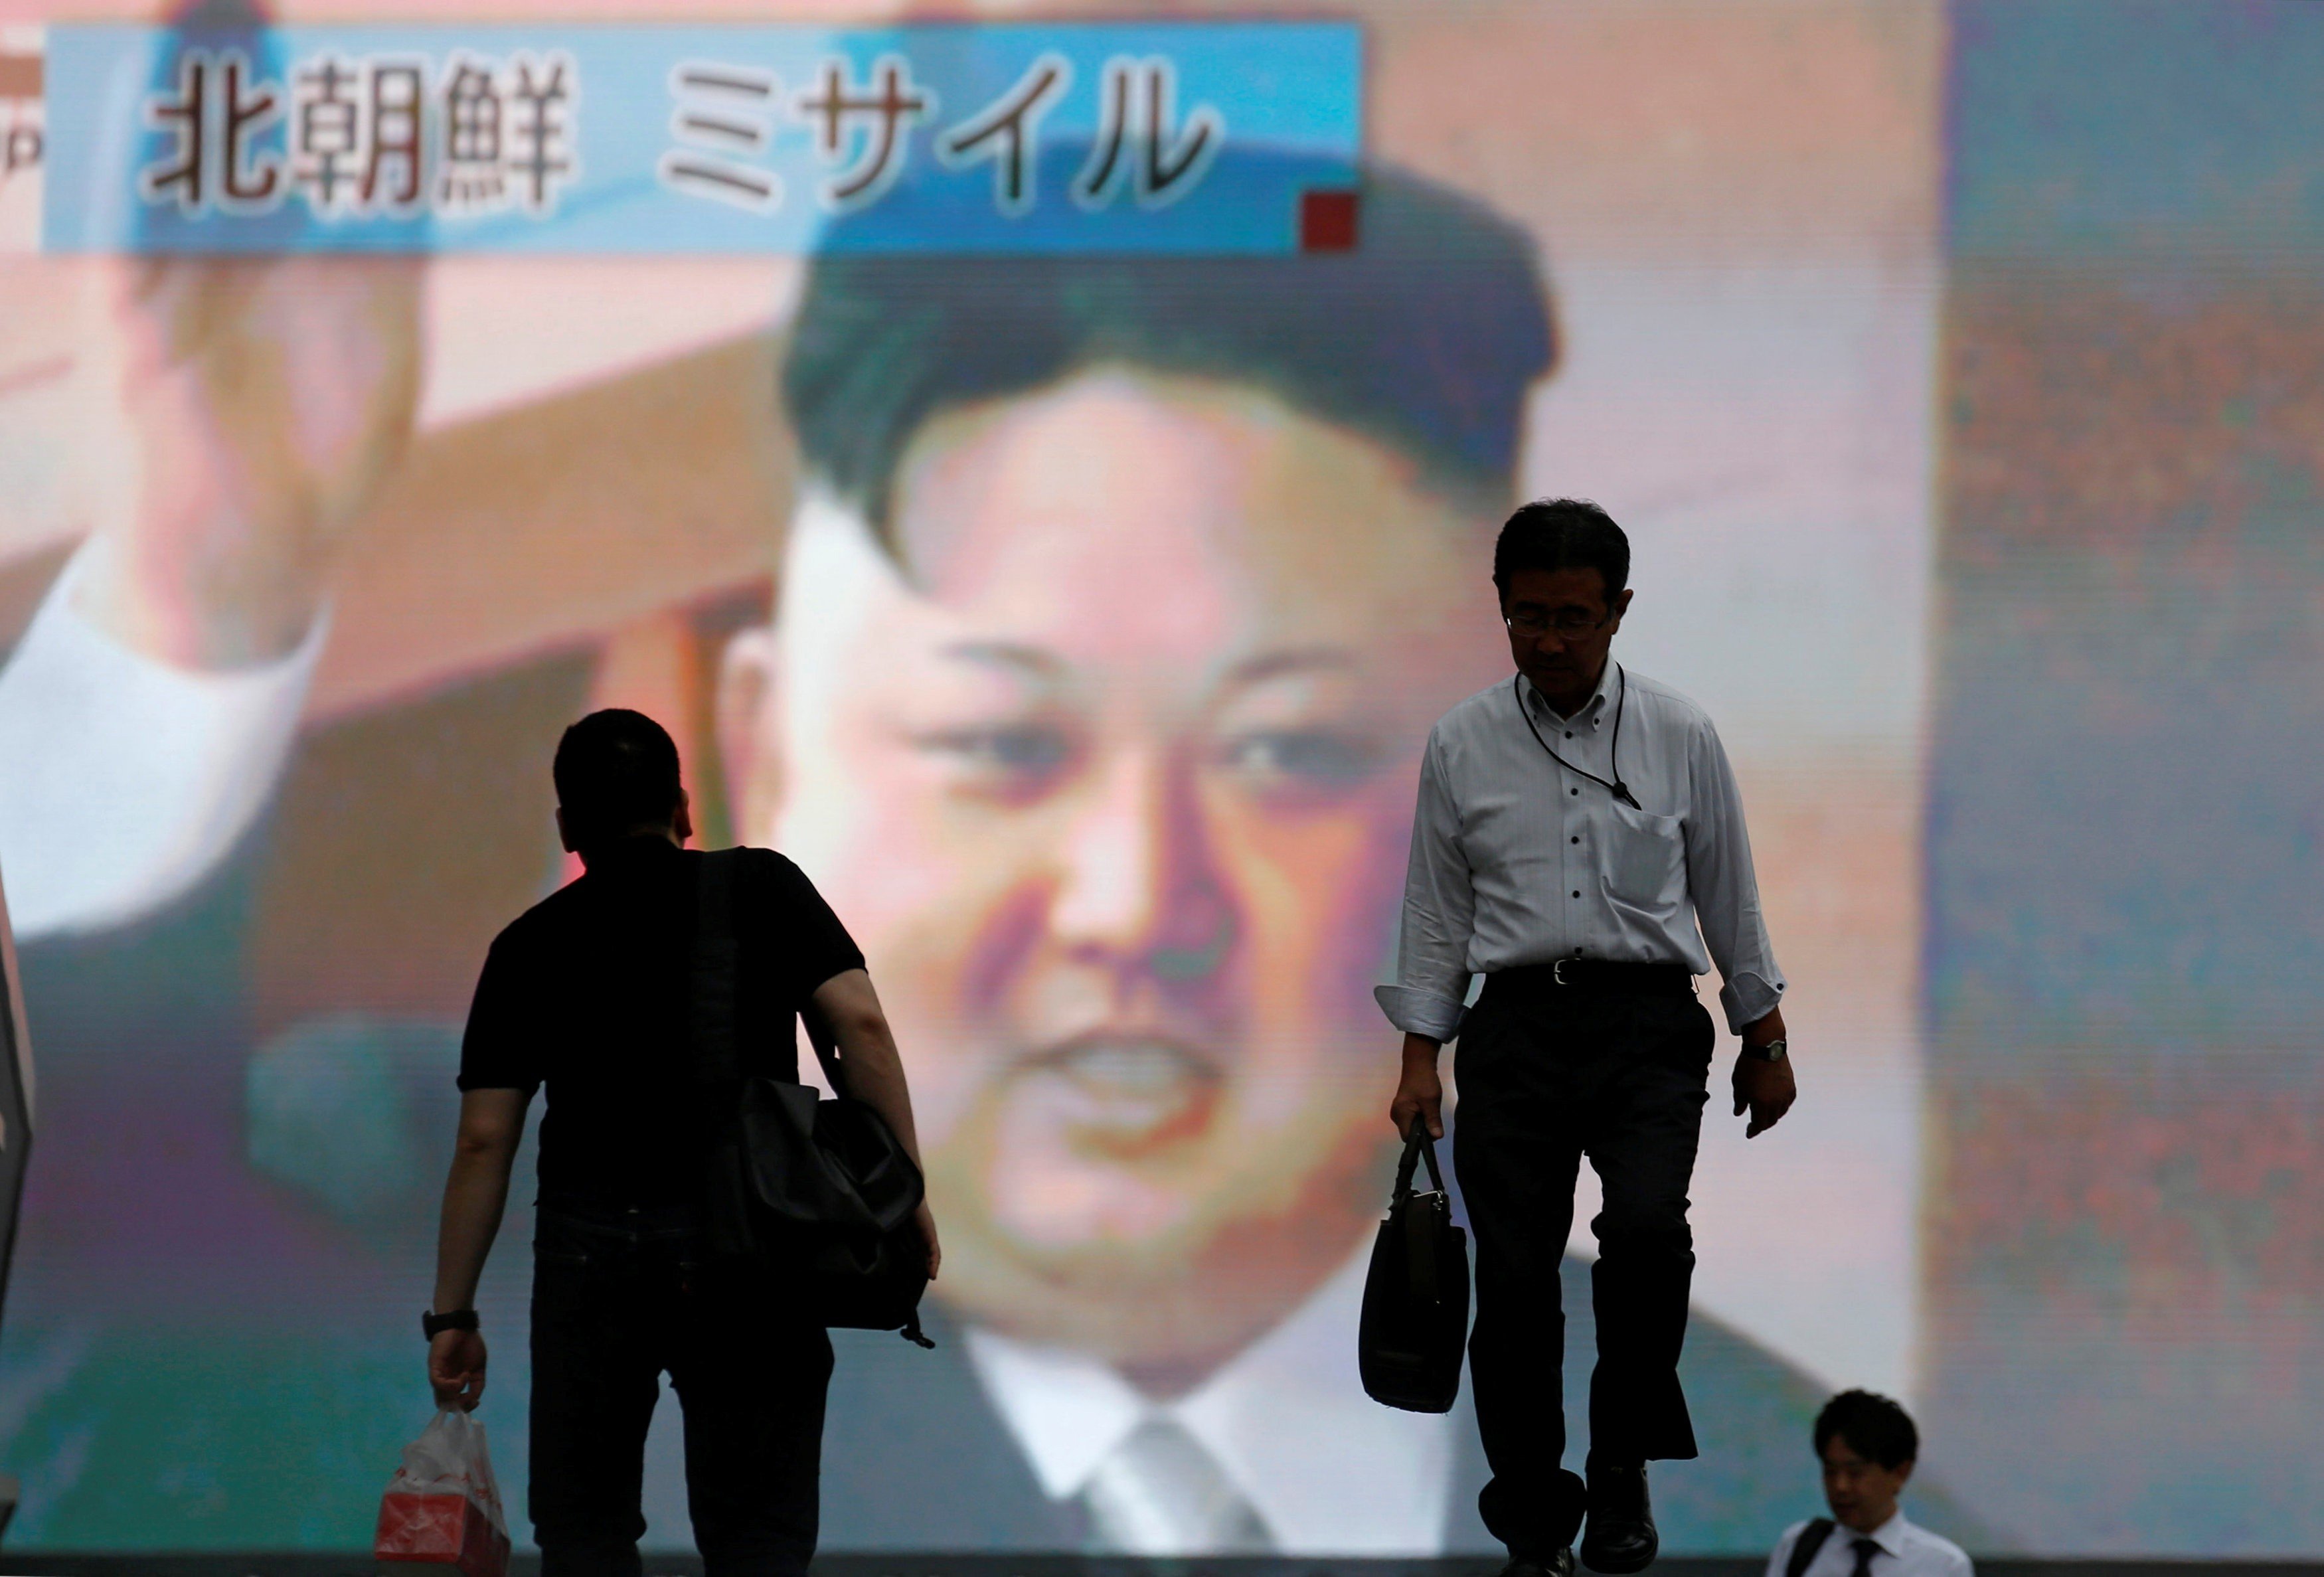 A TV screen in Tokyo broadcasts news of North Korea’s missile test on Tuesday. Photo: Reuters